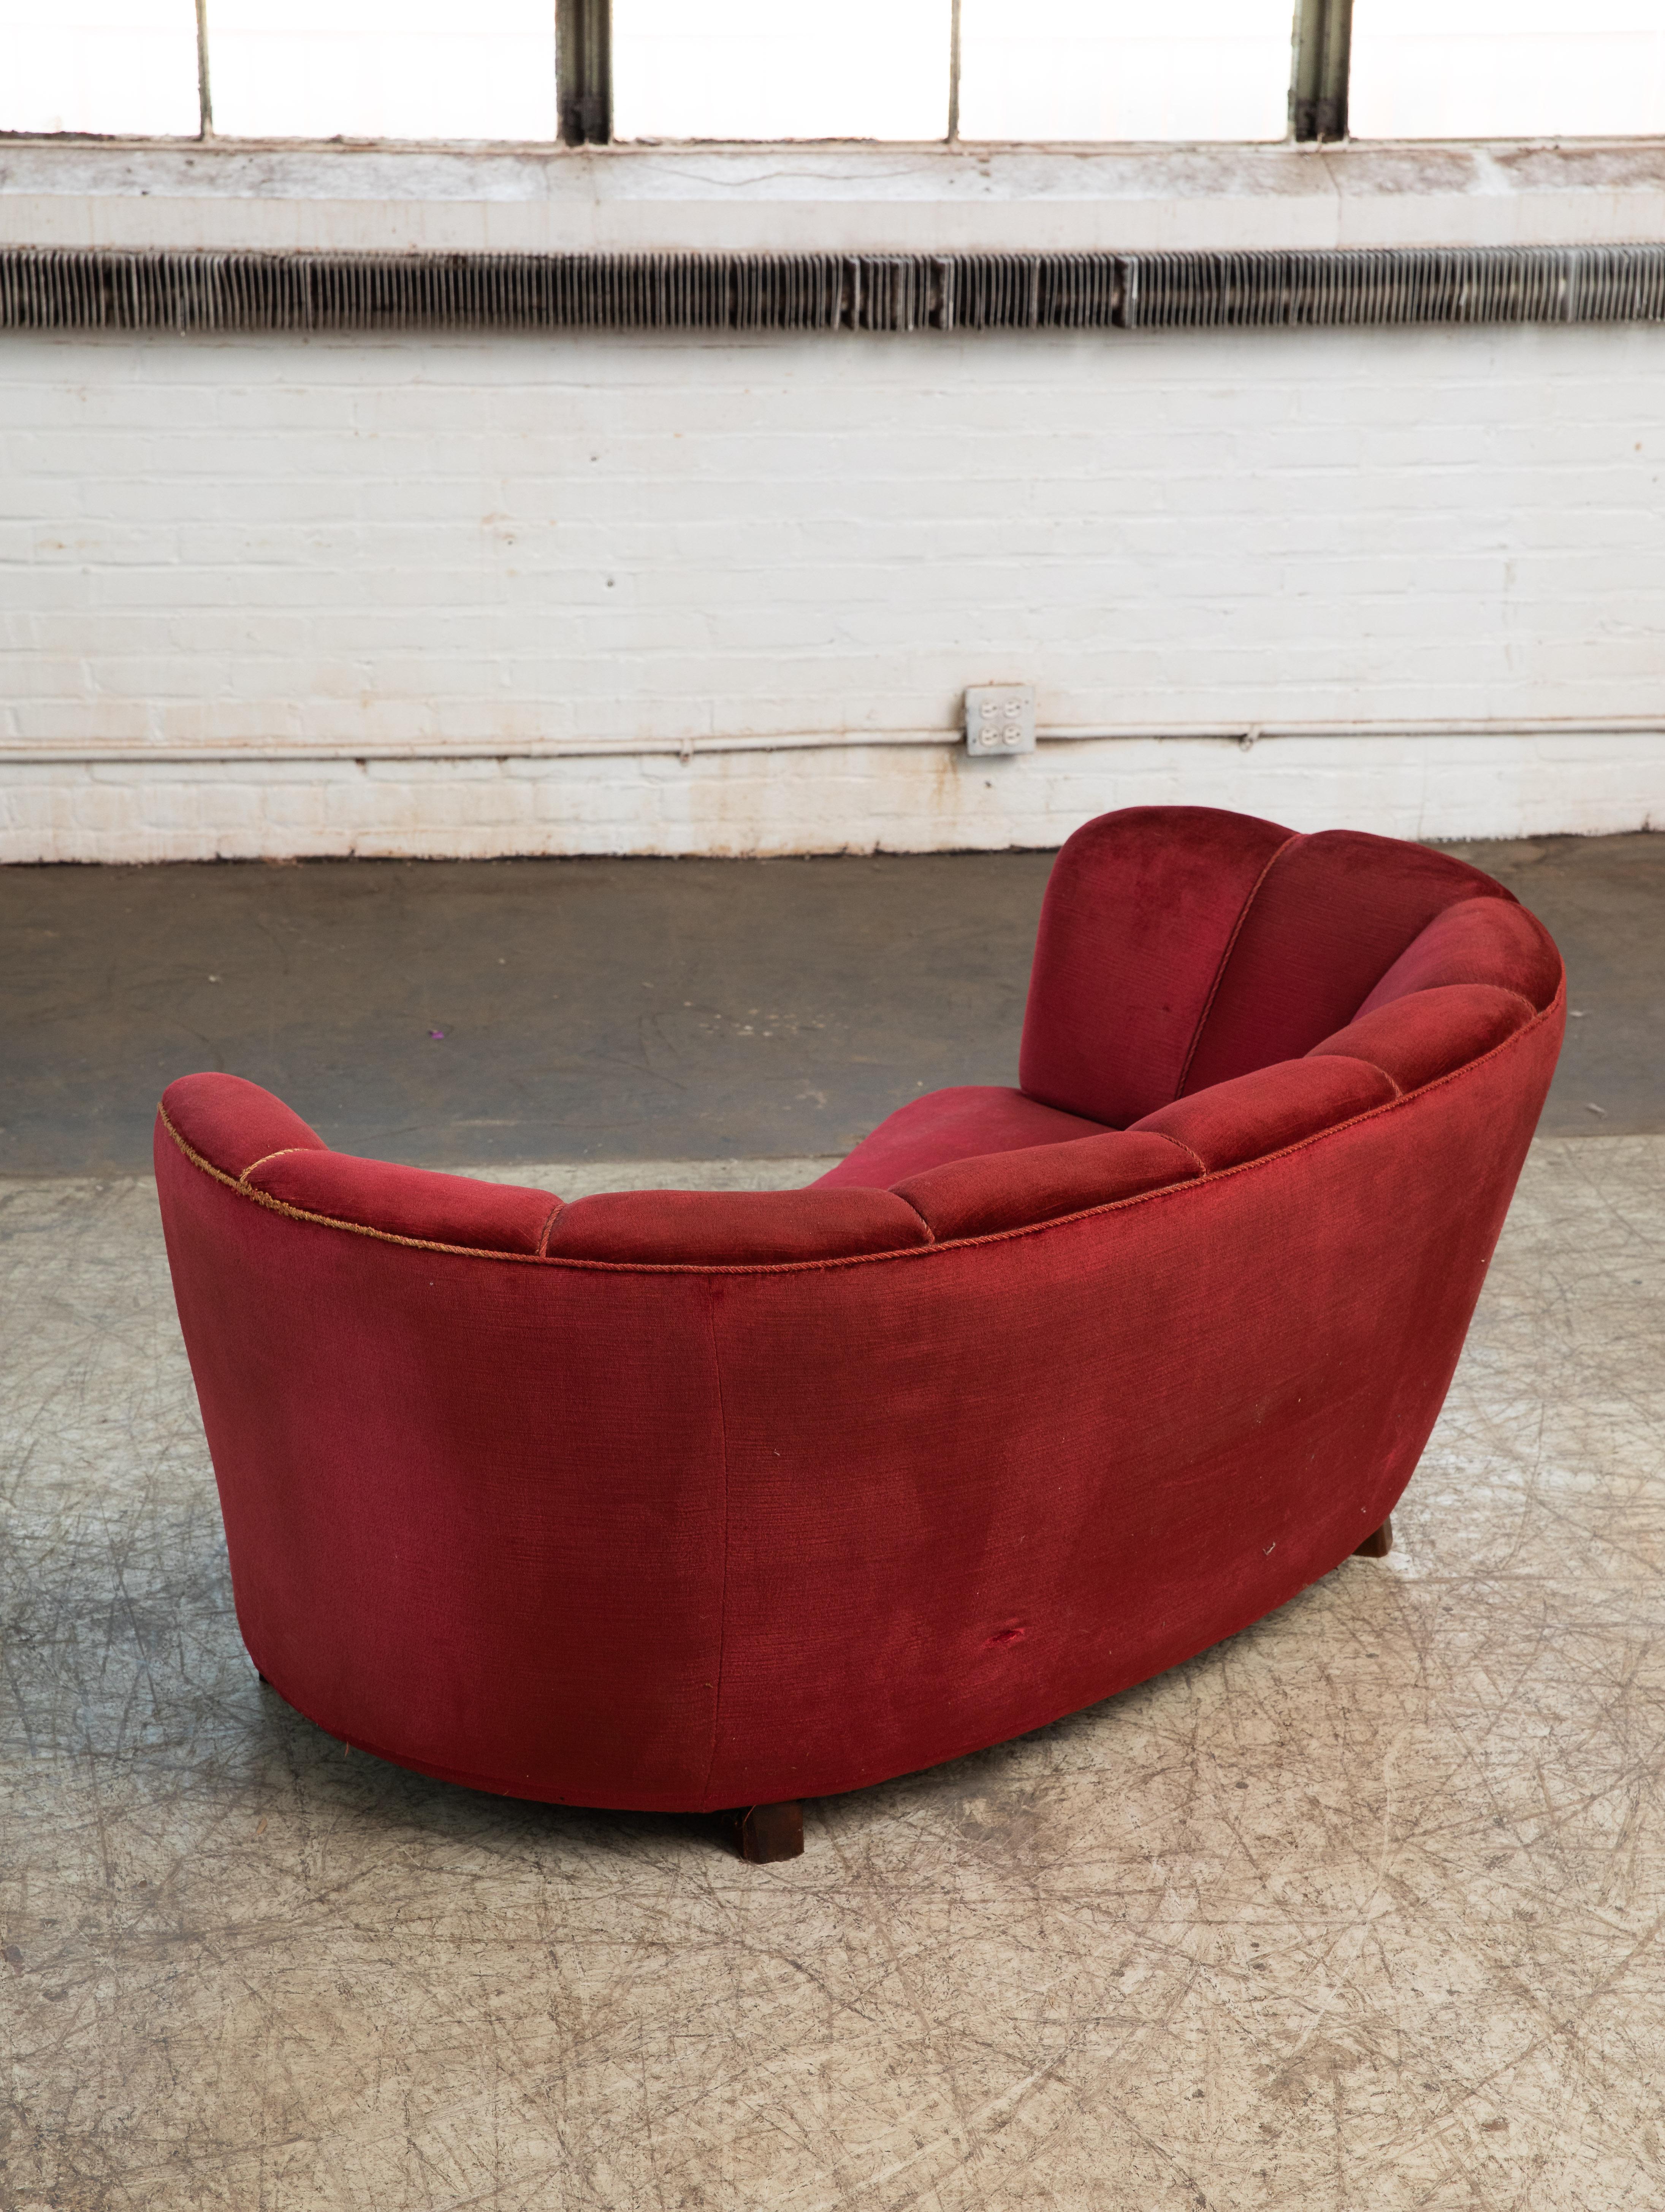 Mid-20th Century Danish 1940s Boesen Style Banana Form Curved Sofa or Loveseat in Red Mohair